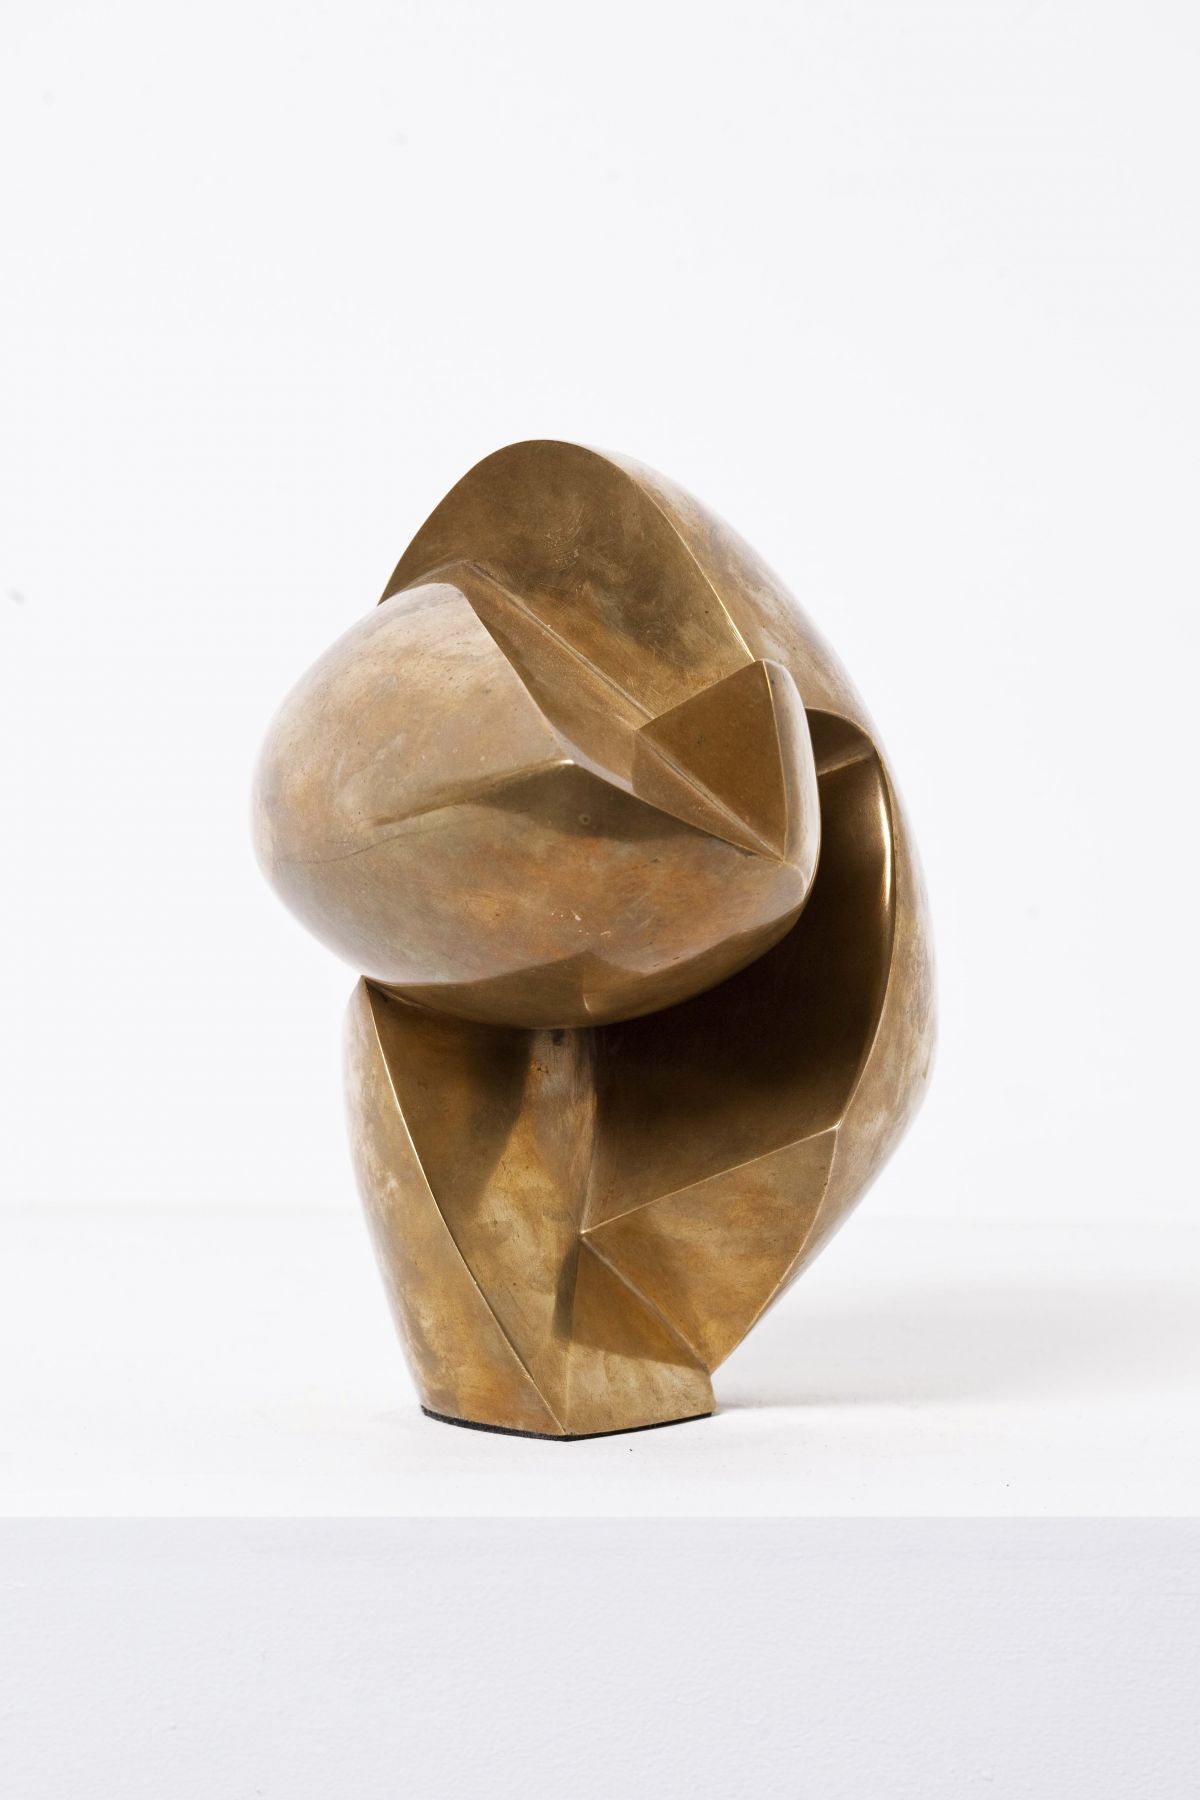 abstracteddistractions:
“ André Bloc, “Untitled”, Circa 1955,
Bronze, 10.5H x 11Dia inches (26.7H x 27.9Dia cm)
Courtesy: Magen H Gallery
”